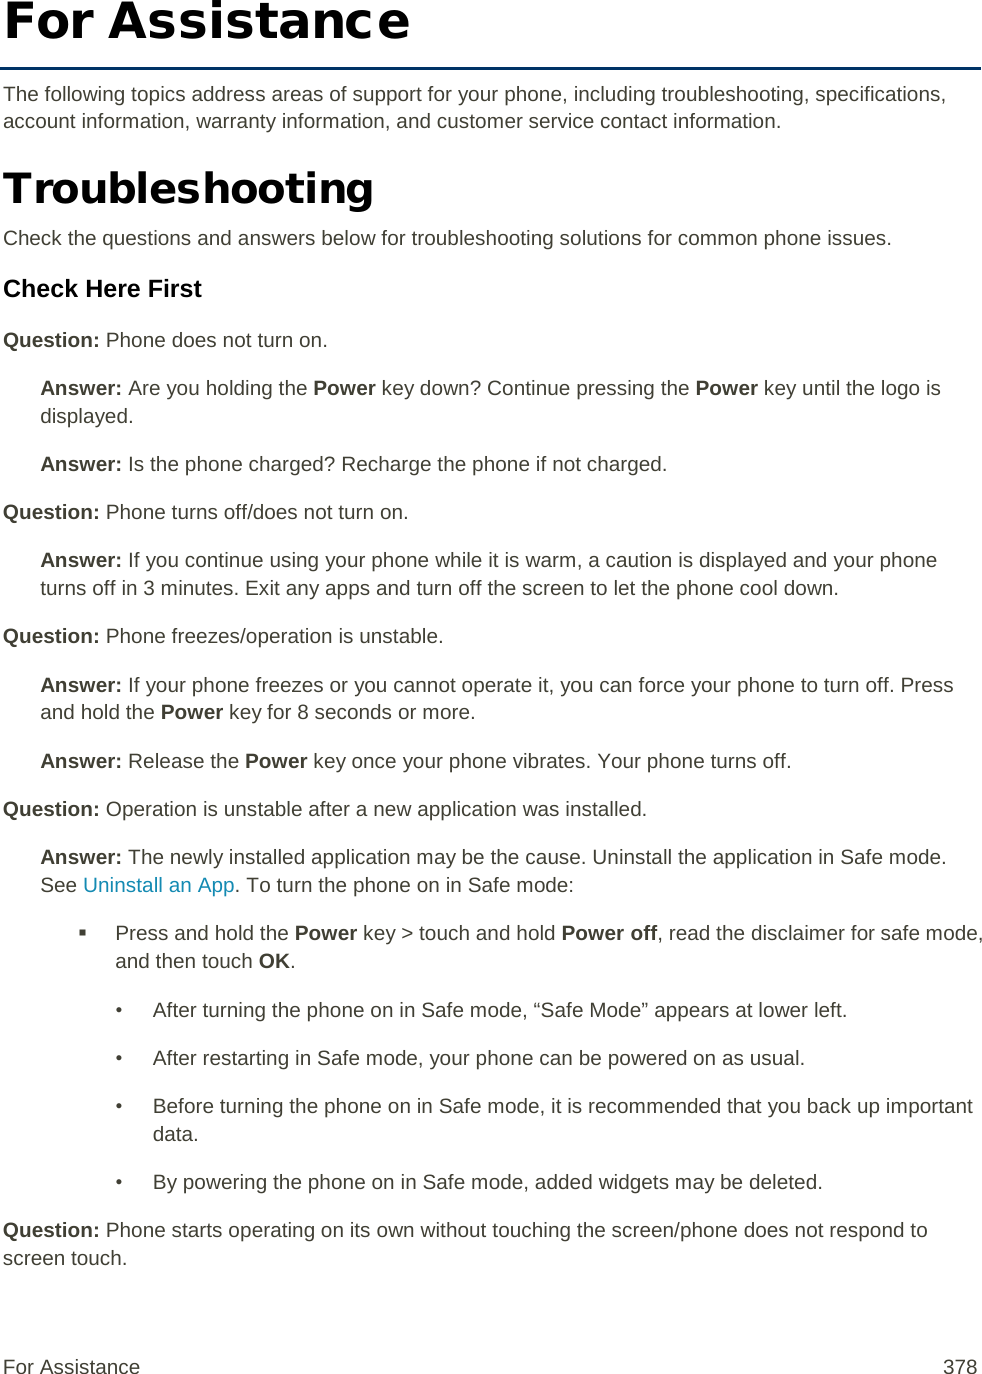 For Assistance The following topics address areas of support for your phone, including troubleshooting, specifications, account information, warranty information, and customer service contact information. Troubleshooting Check the questions and answers below for troubleshooting solutions for common phone issues. Check Here First Question: Phone does not turn on. Answer: Are you holding the Power key down? Continue pressing the Power key until the logo is displayed. Answer: Is the phone charged? Recharge the phone if not charged. Question: Phone turns off/does not turn on. Answer: If you continue using your phone while it is warm, a caution is displayed and your phone turns off in 3 minutes. Exit any apps and turn off the screen to let the phone cool down. Question: Phone freezes/operation is unstable. Answer: If your phone freezes or you cannot operate it, you can force your phone to turn off. Press and hold the Power key for 8 seconds or more. Answer: Release the Power key once your phone vibrates. Your phone turns off.  Question: Operation is unstable after a new application was installed. Answer: The newly installed application may be the cause. Uninstall the application in Safe mode. See Uninstall an App. To turn the phone on in Safe mode:  Press and hold the Power key &gt; touch and hold Power off, read the disclaimer for safe mode, and then touch OK. • After turning the phone on in Safe mode, “Safe Mode” appears at lower left. • After restarting in Safe mode, your phone can be powered on as usual. • Before turning the phone on in Safe mode, it is recommended that you back up important data. • By powering the phone on in Safe mode, added widgets may be deleted. Question: Phone starts operating on its own without touching the screen/phone does not respond to screen touch. For Assistance 378 